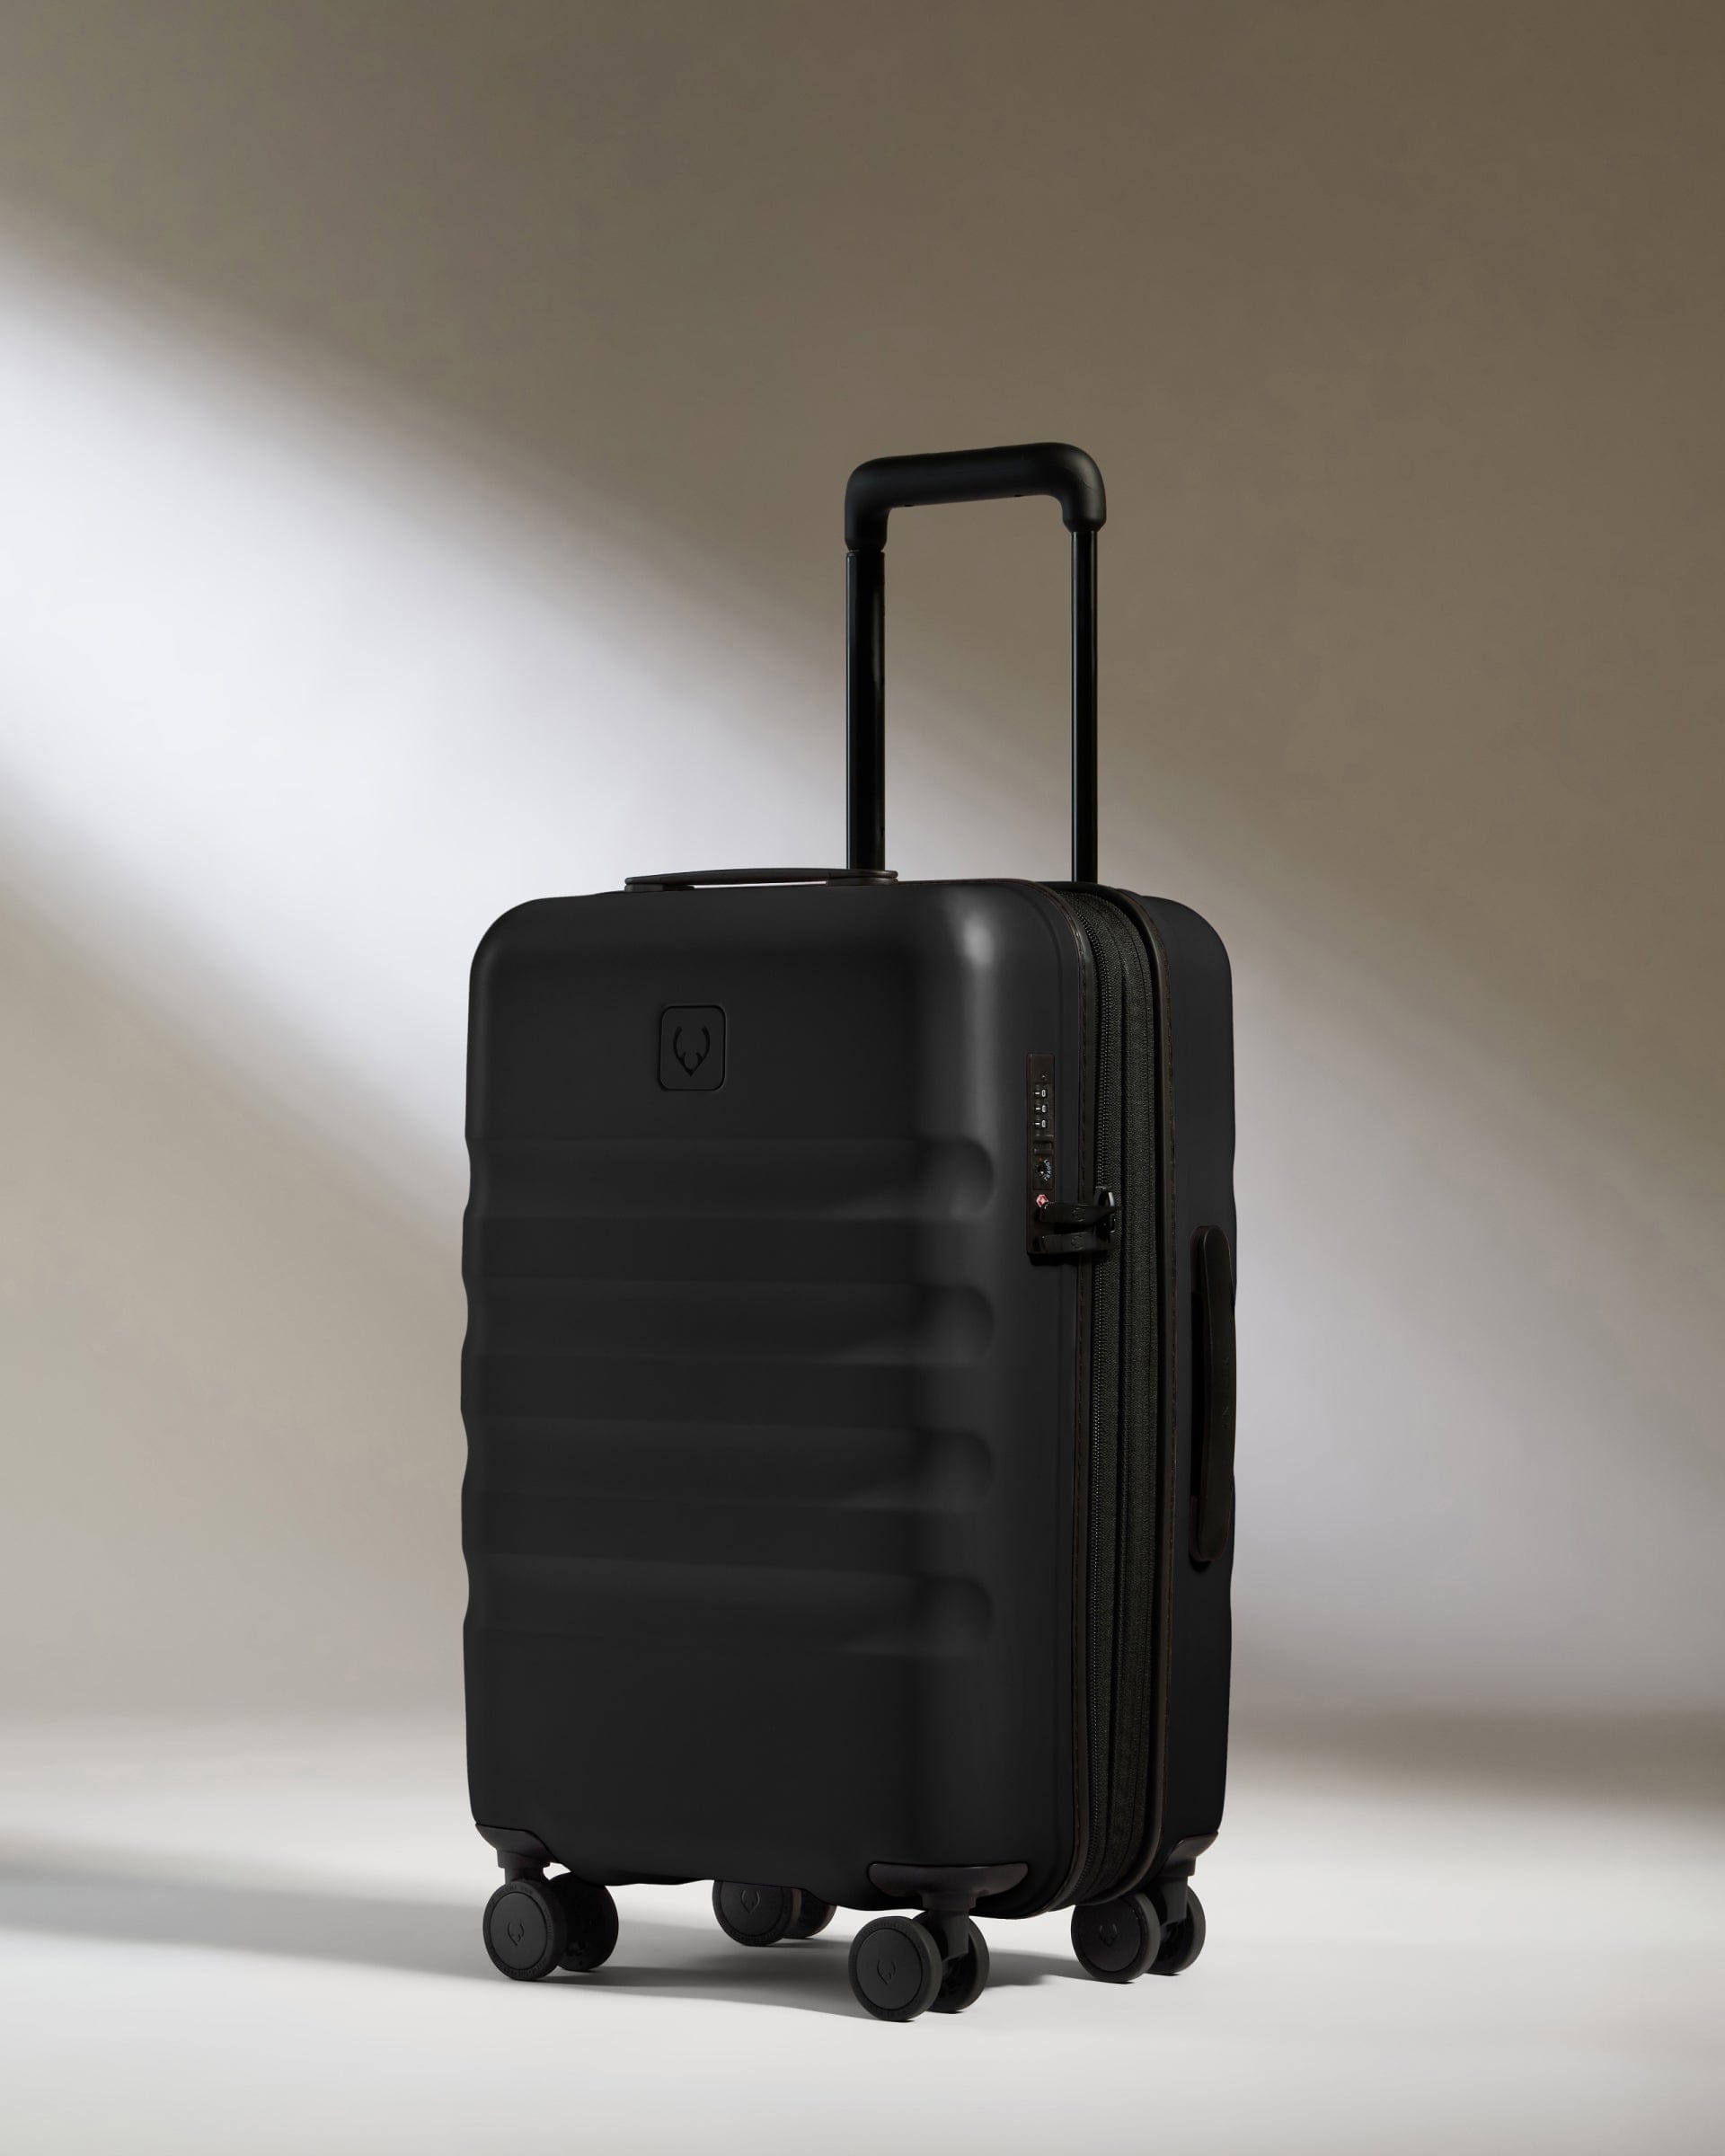 View Antler Icon Stripe Cabin Suitcase With Expander In Black Size 23cm x 55cm x 36cm information